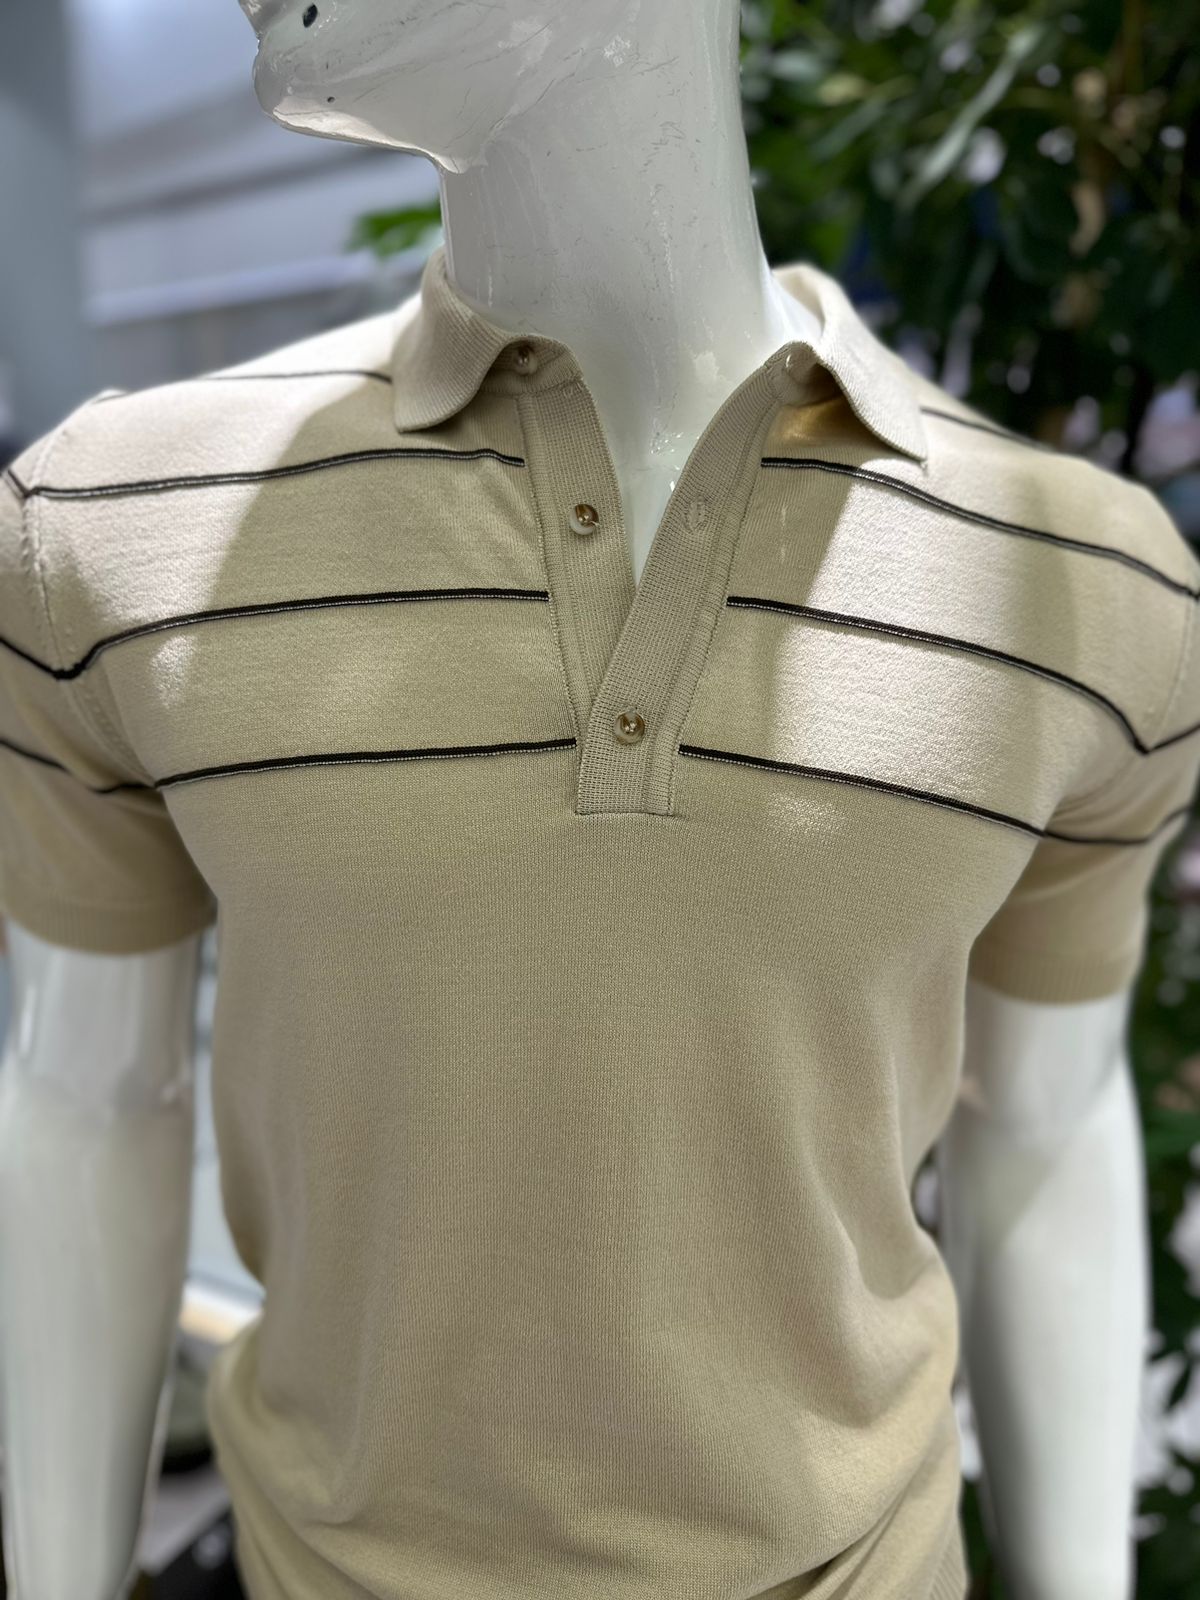 Men's Polo Knit Tshirt with stripe